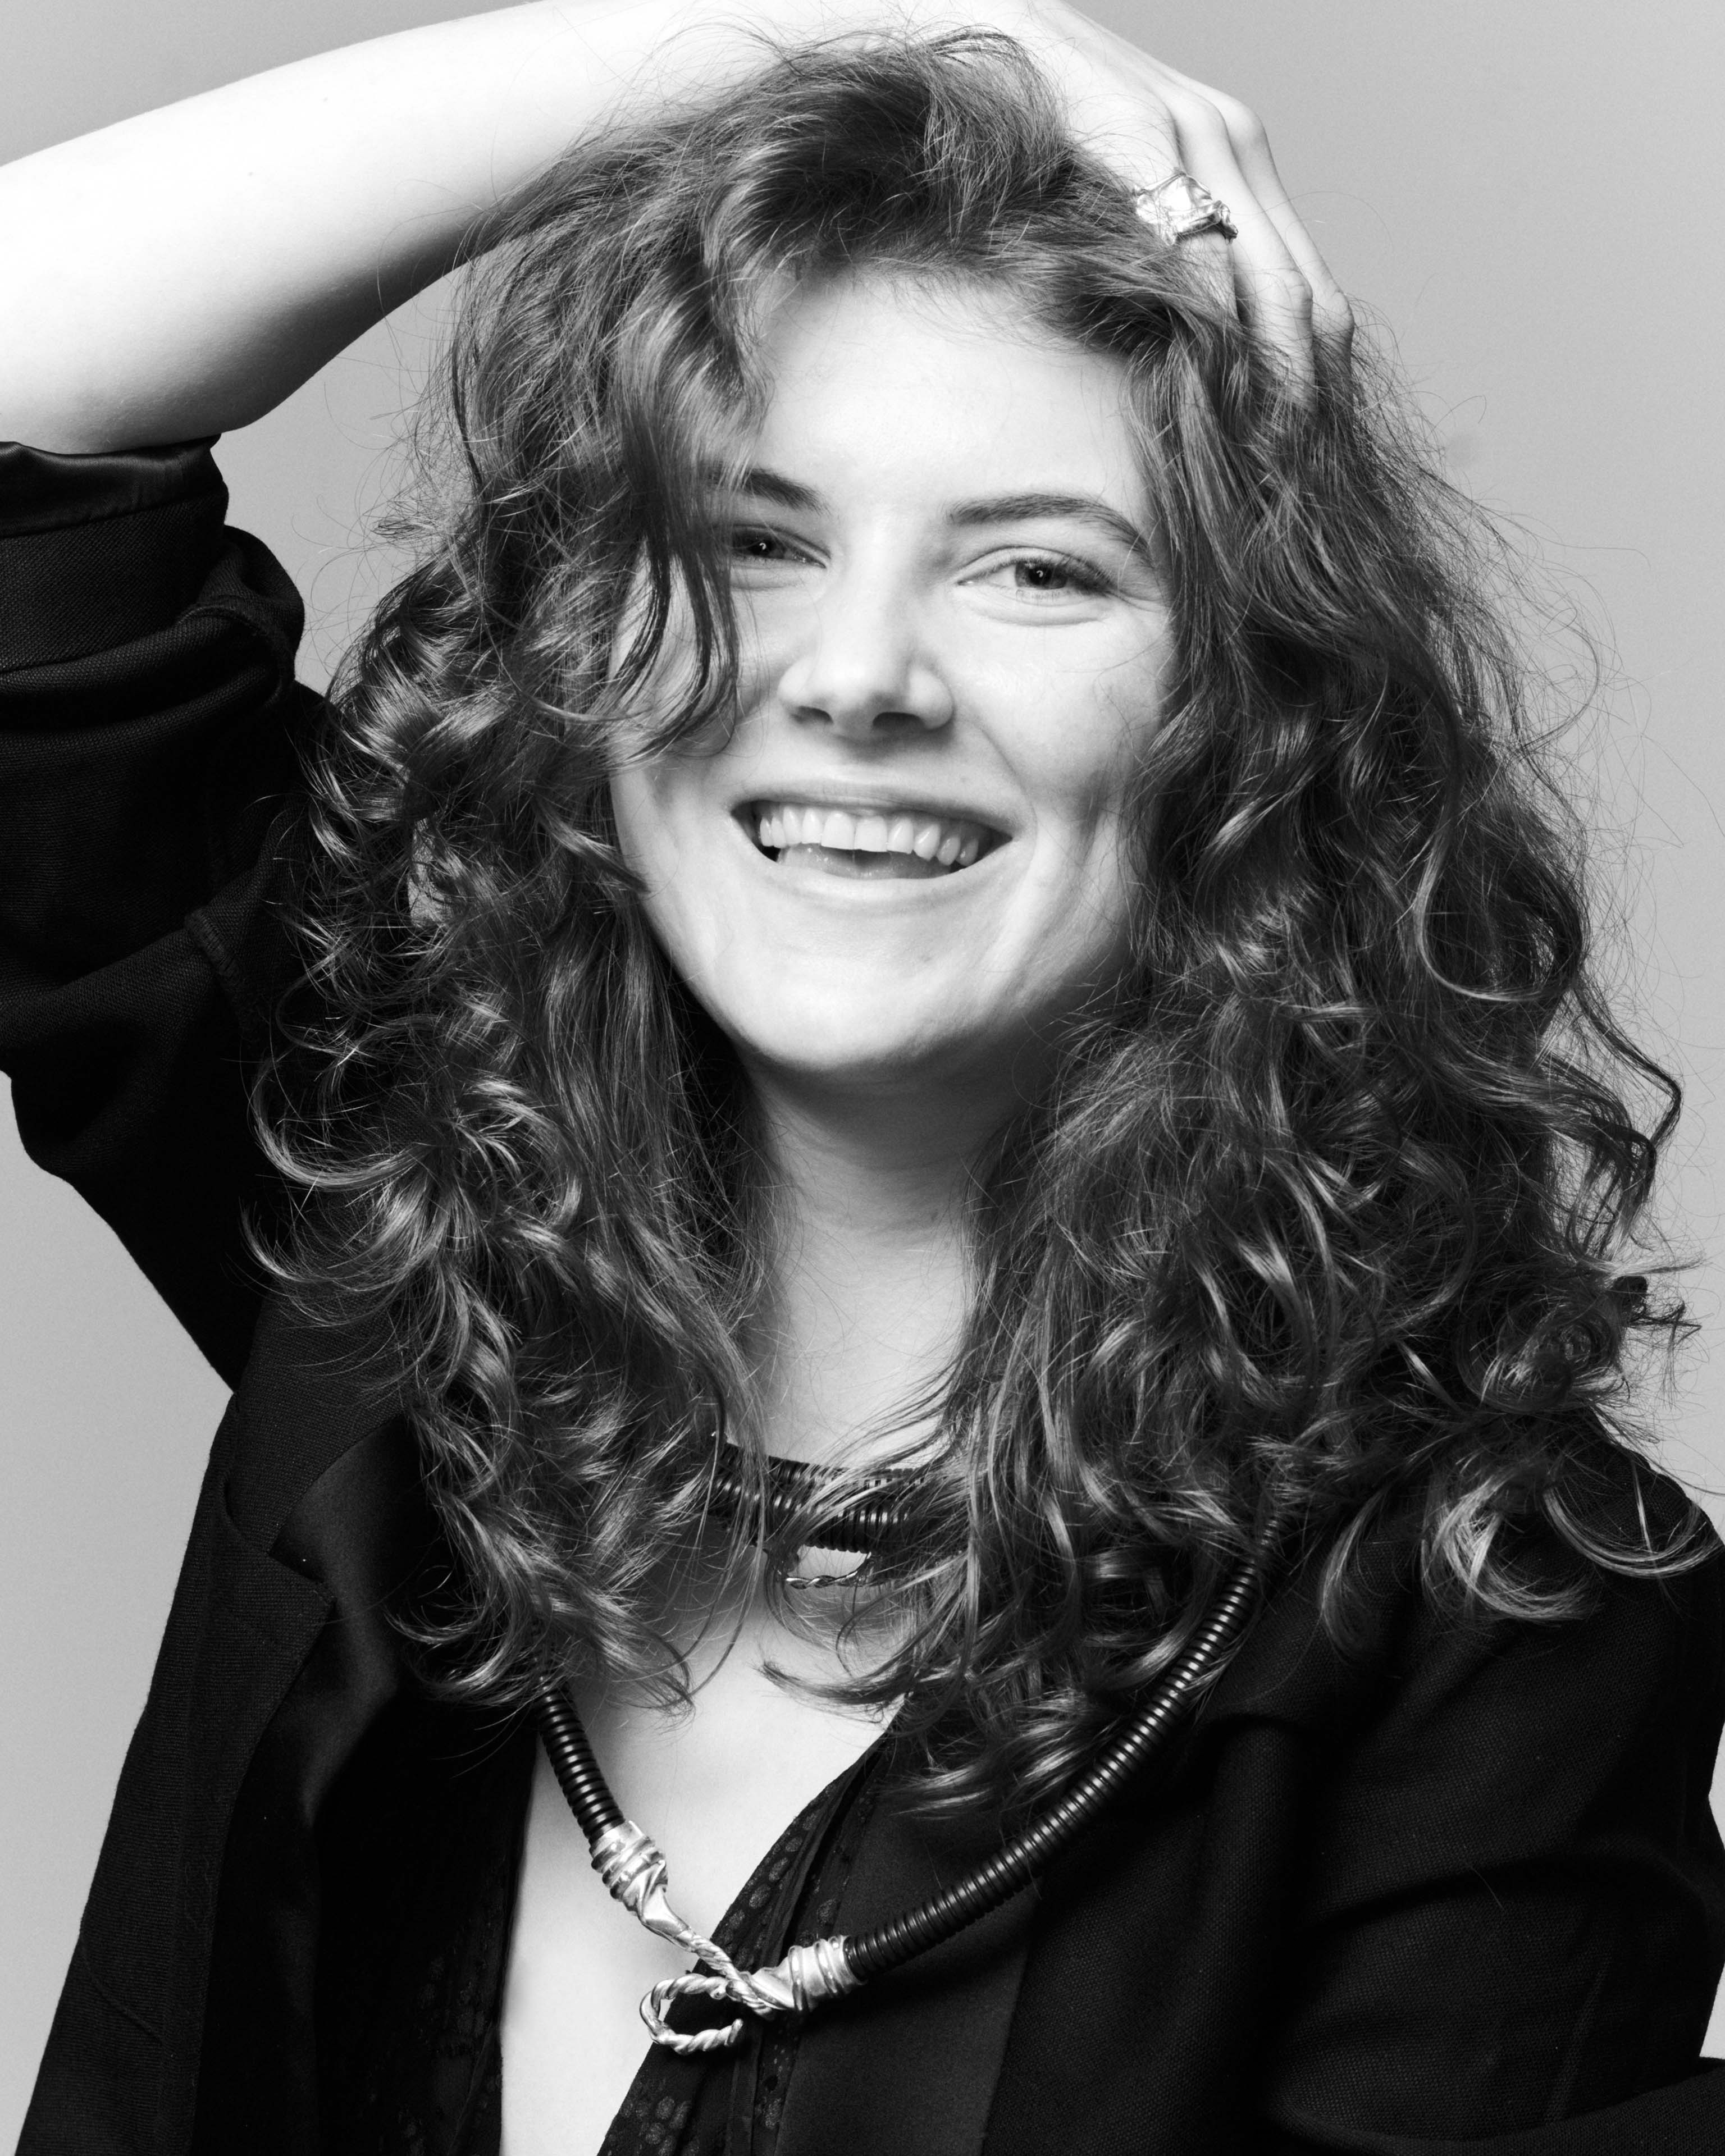 Young woman wears three hose chains over a black blazer, she laughs and has her hand on her head, she has long curly hair